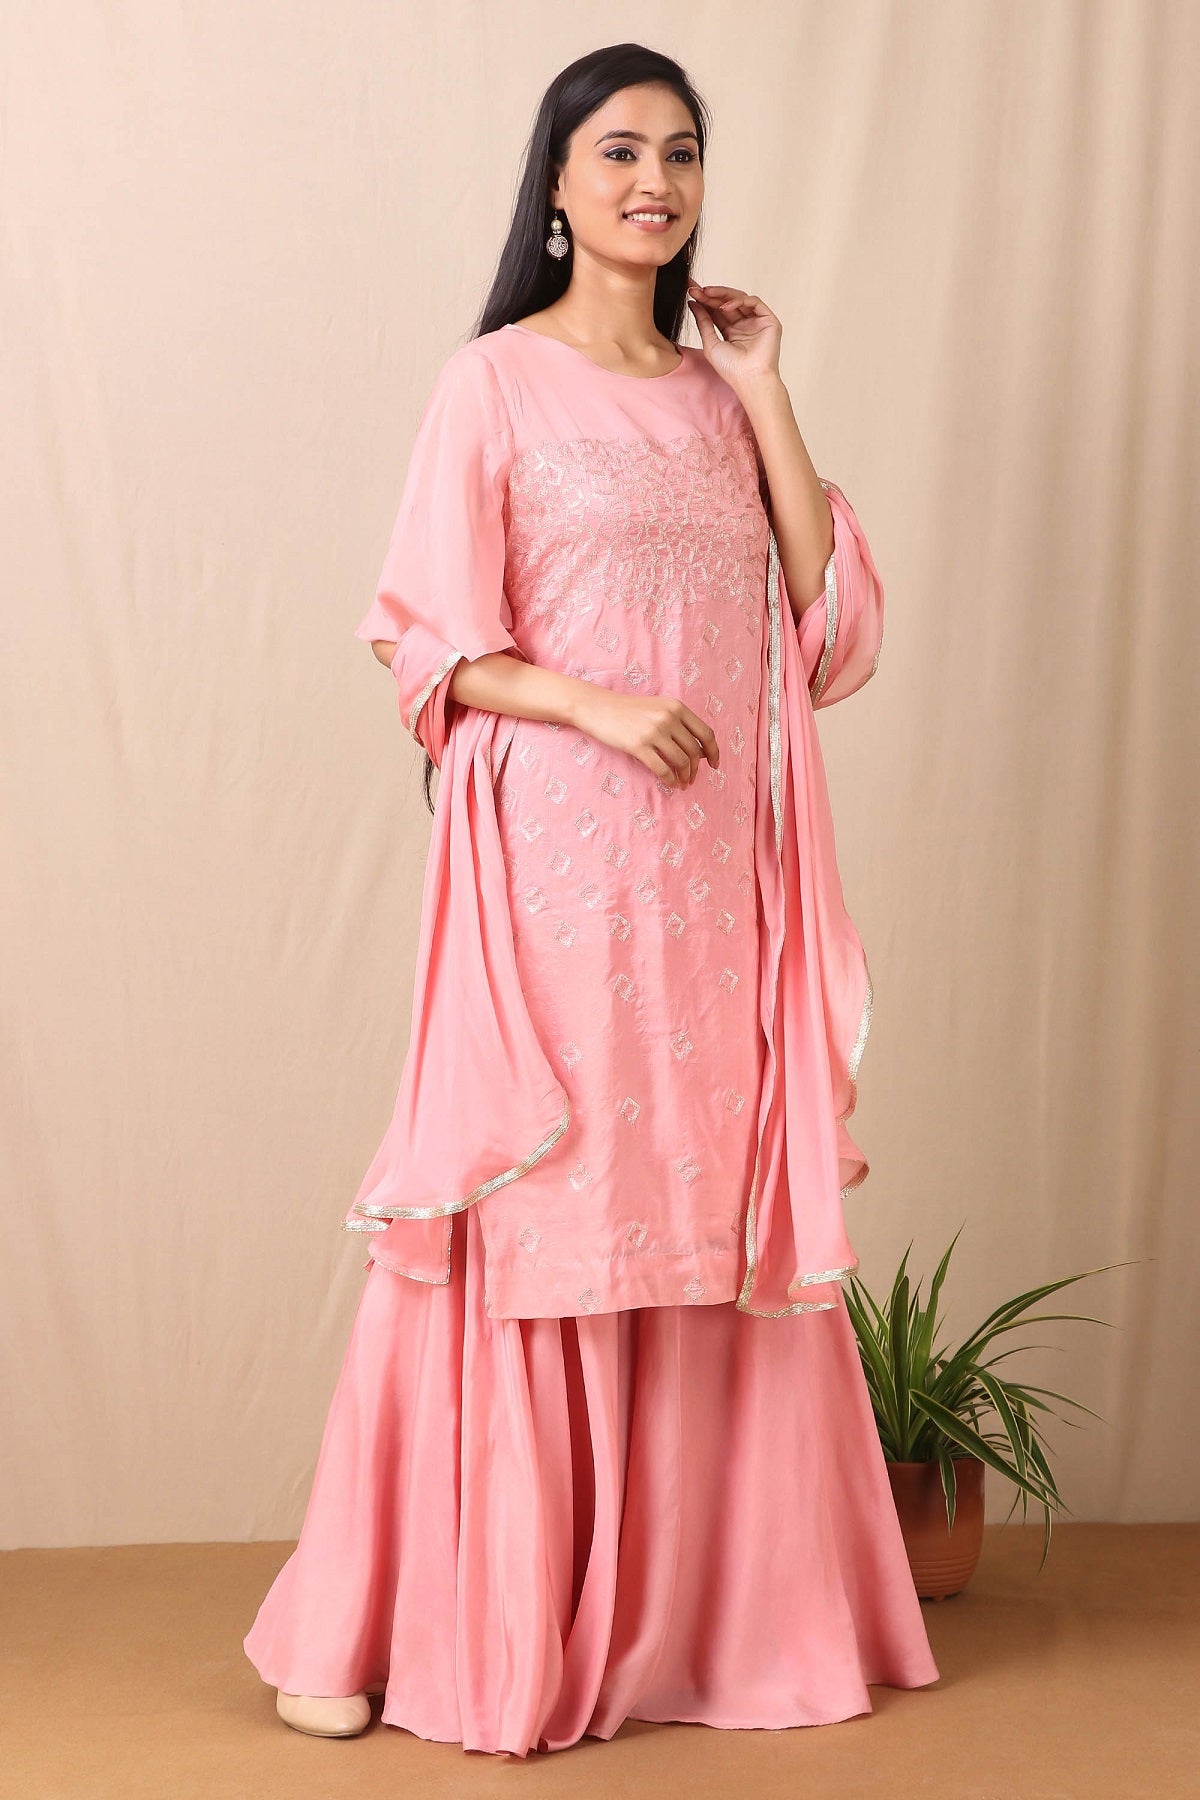 Shop beautiful set of set of Pink Upadda Silk with Satin Organza Sharara and Tabby Dupatta and Tonal Sequins Motifs, lace around the neckline with beautiful tassels on it from Pure Elegance. Light up your ethnic collection of clothing with this kurta and sharara from Pure elegance. It's woven from a fabric that's airy and uber soft against your skin. Pair it up with statement jewellery to complete your look from Pure Elegance Indian clothing store in USA online now.-Side view.